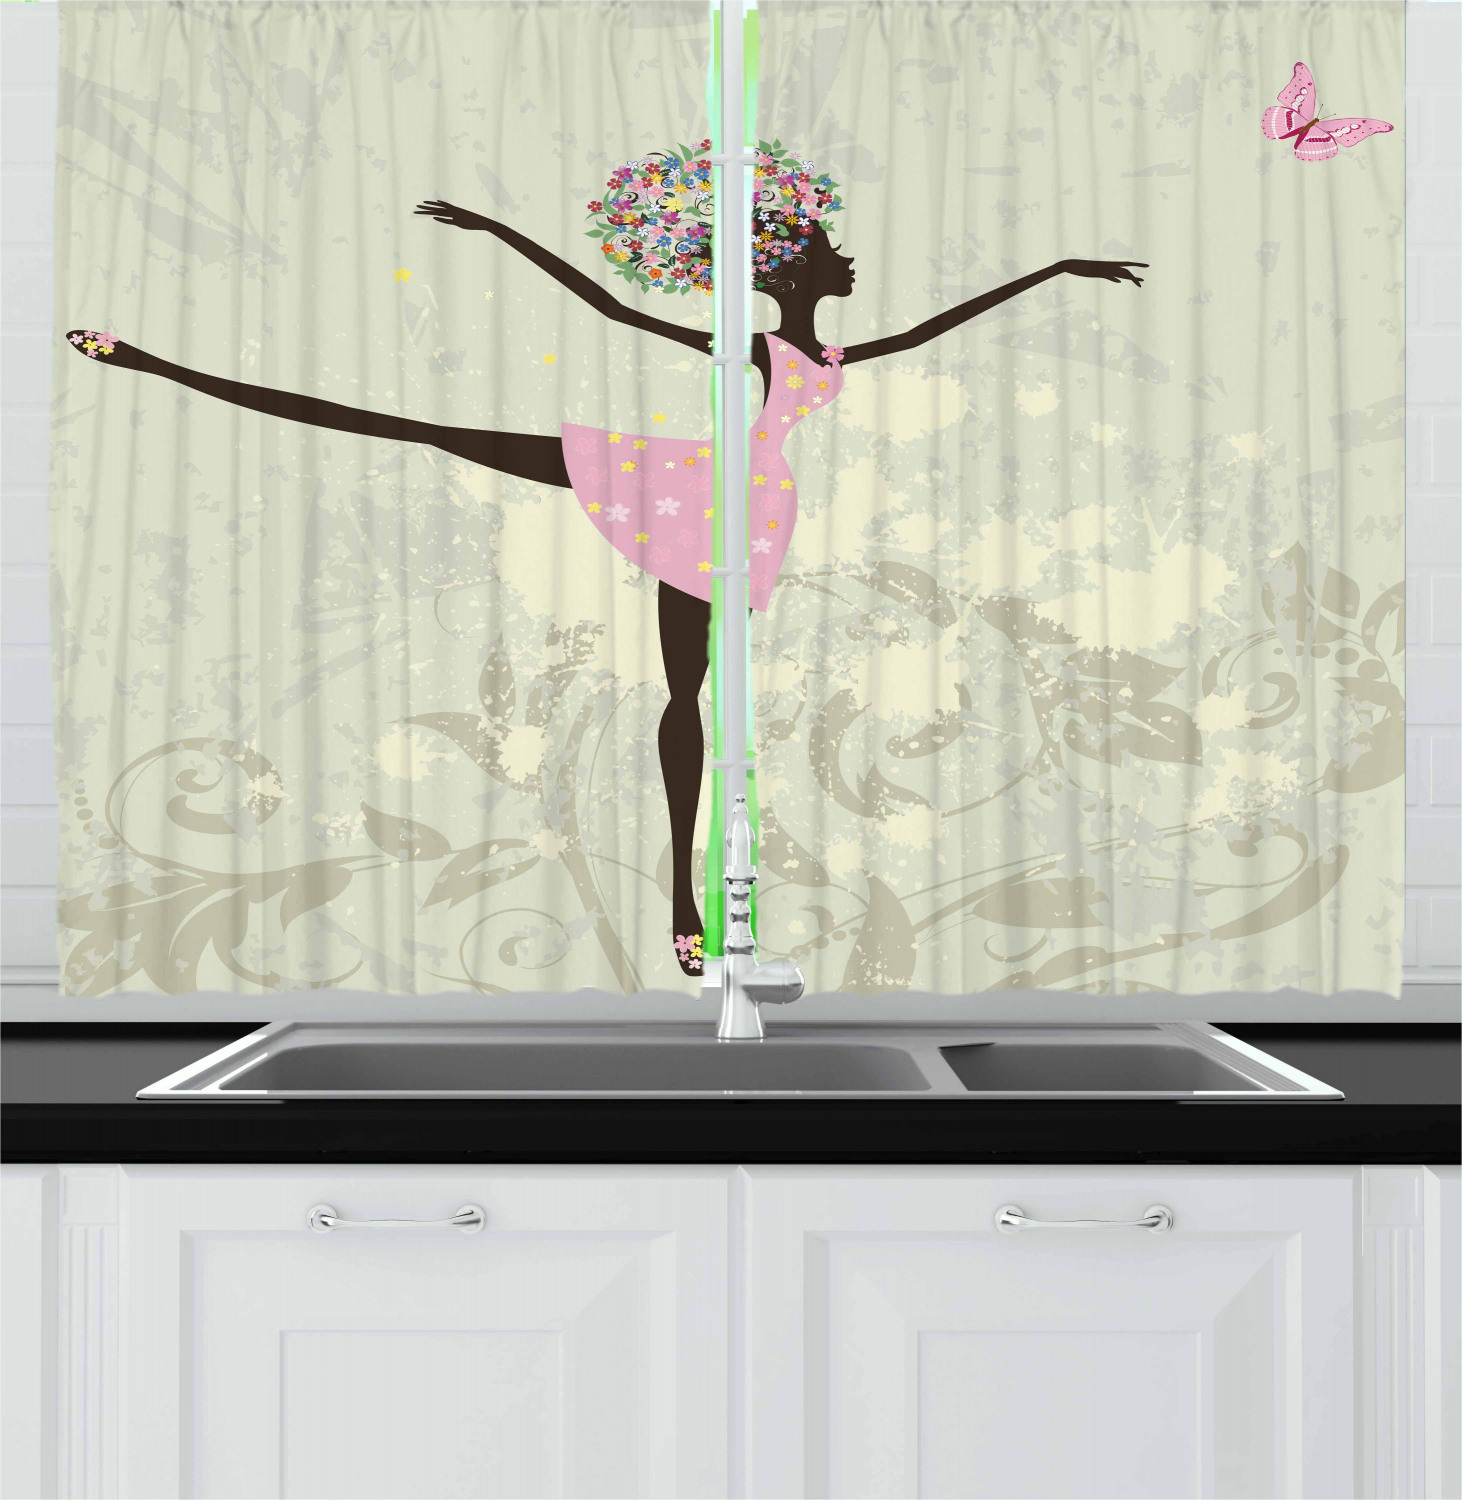 Ballet Kitchen Curtains 2 Panel Set Window Drapes 55" X 39" by Ambesonne 